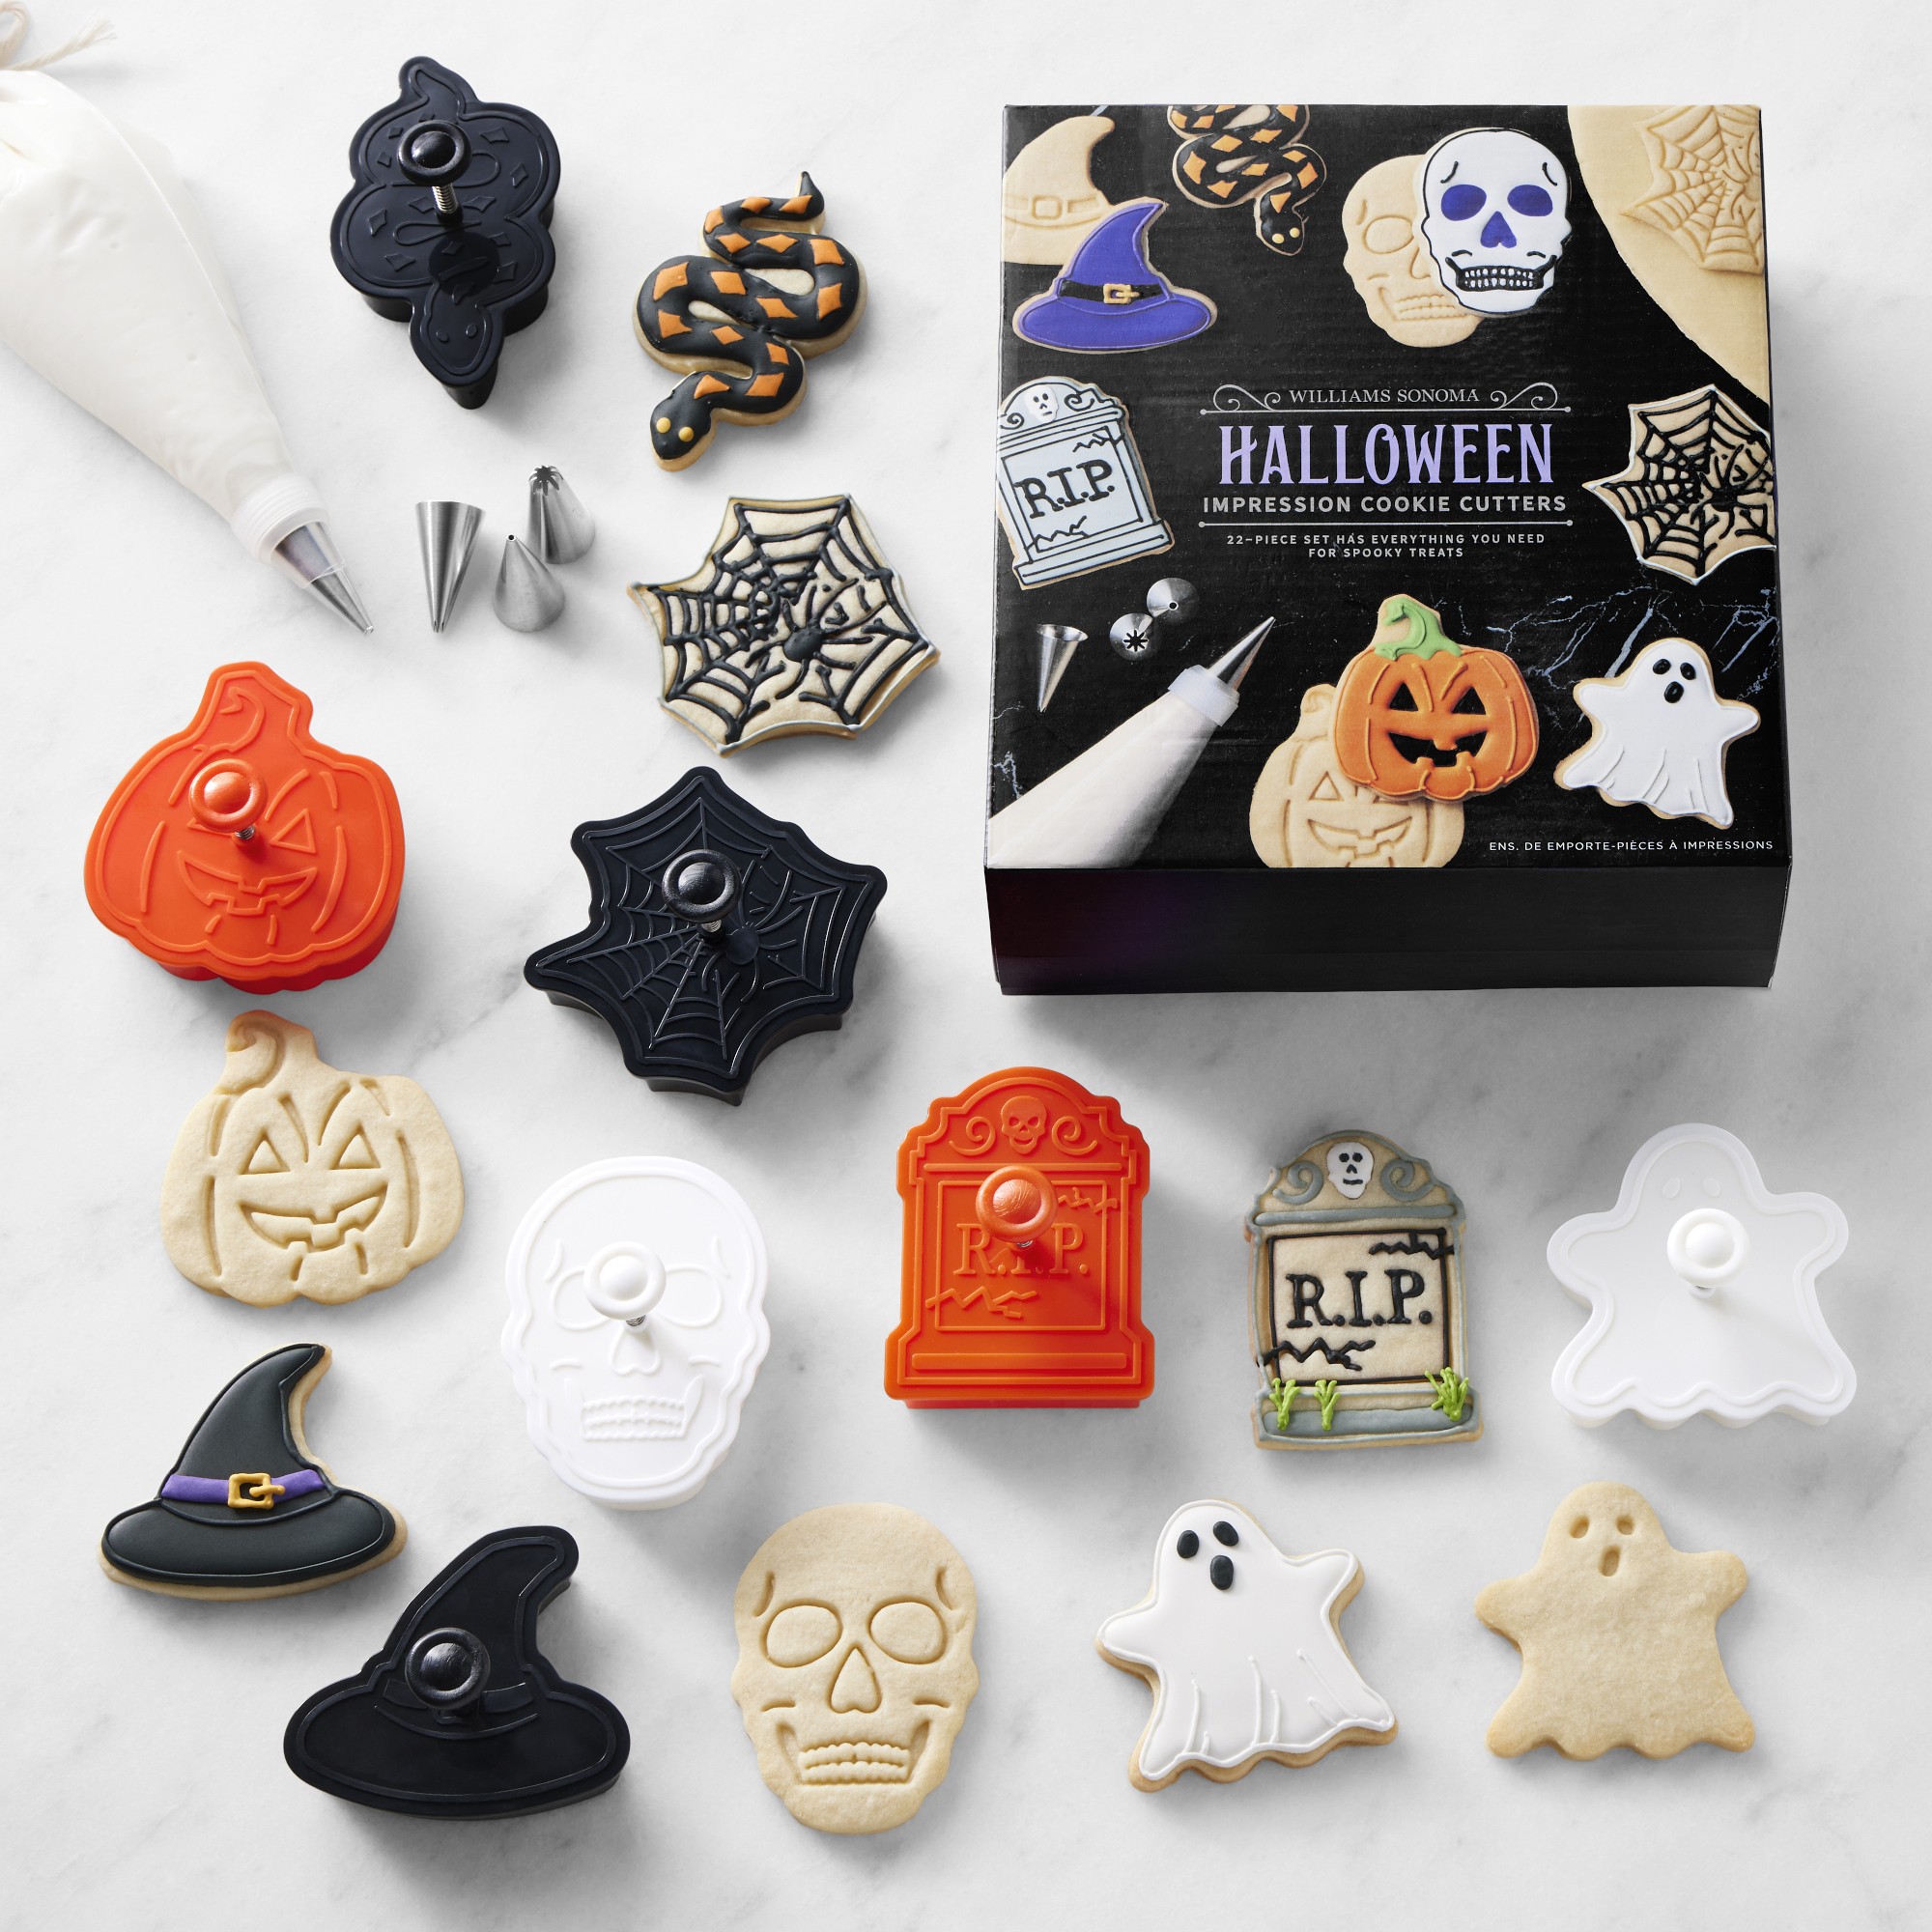 Williams Sonoma Halloween Impression Cookie Cutters, Set of 22